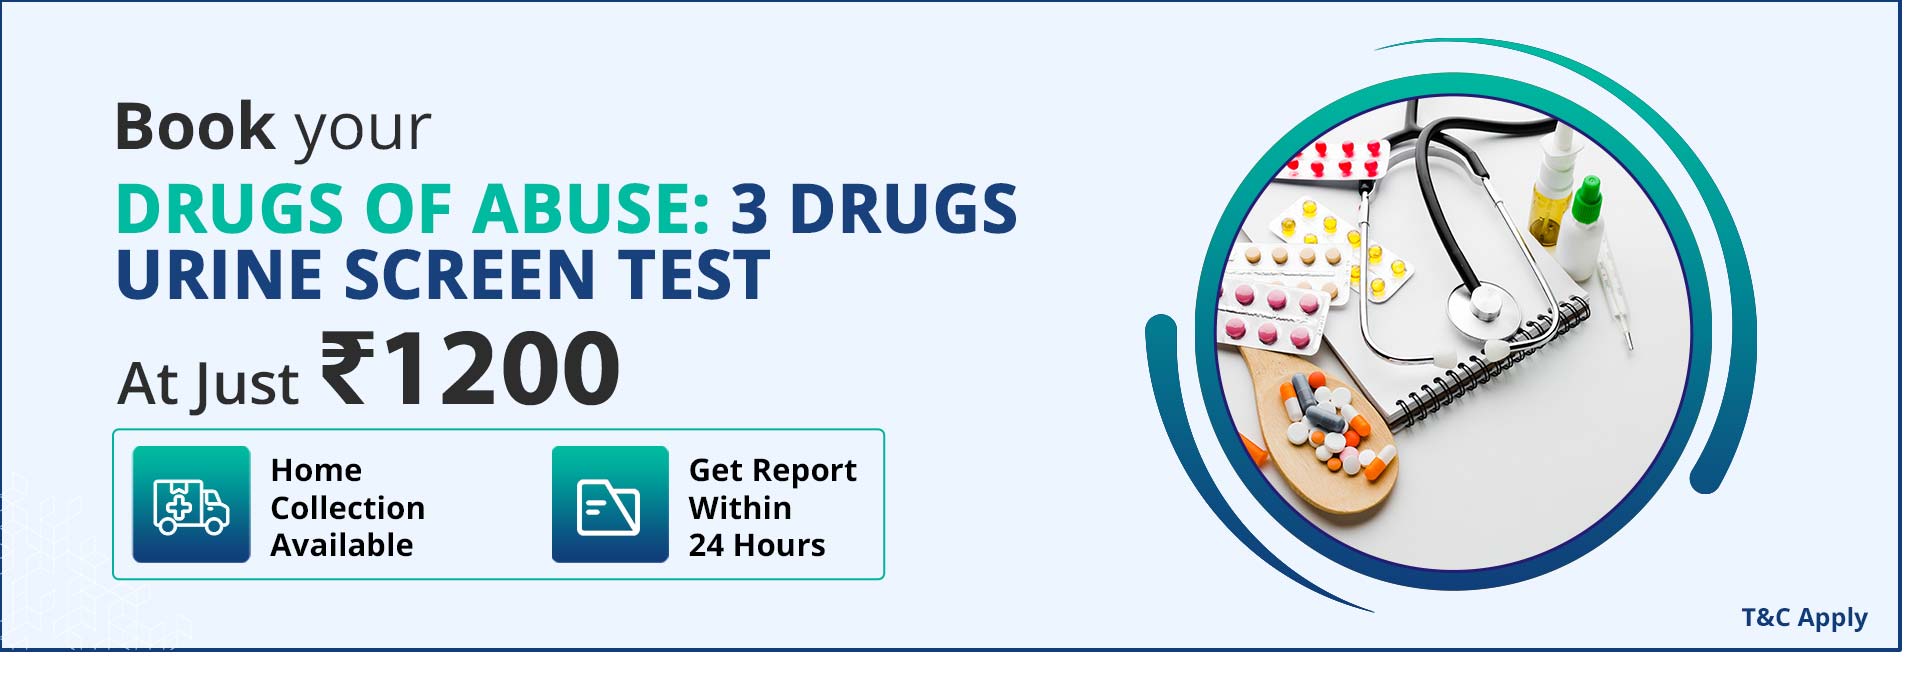 Drugs of Abuse: 3 Drugs Urine Screen Test